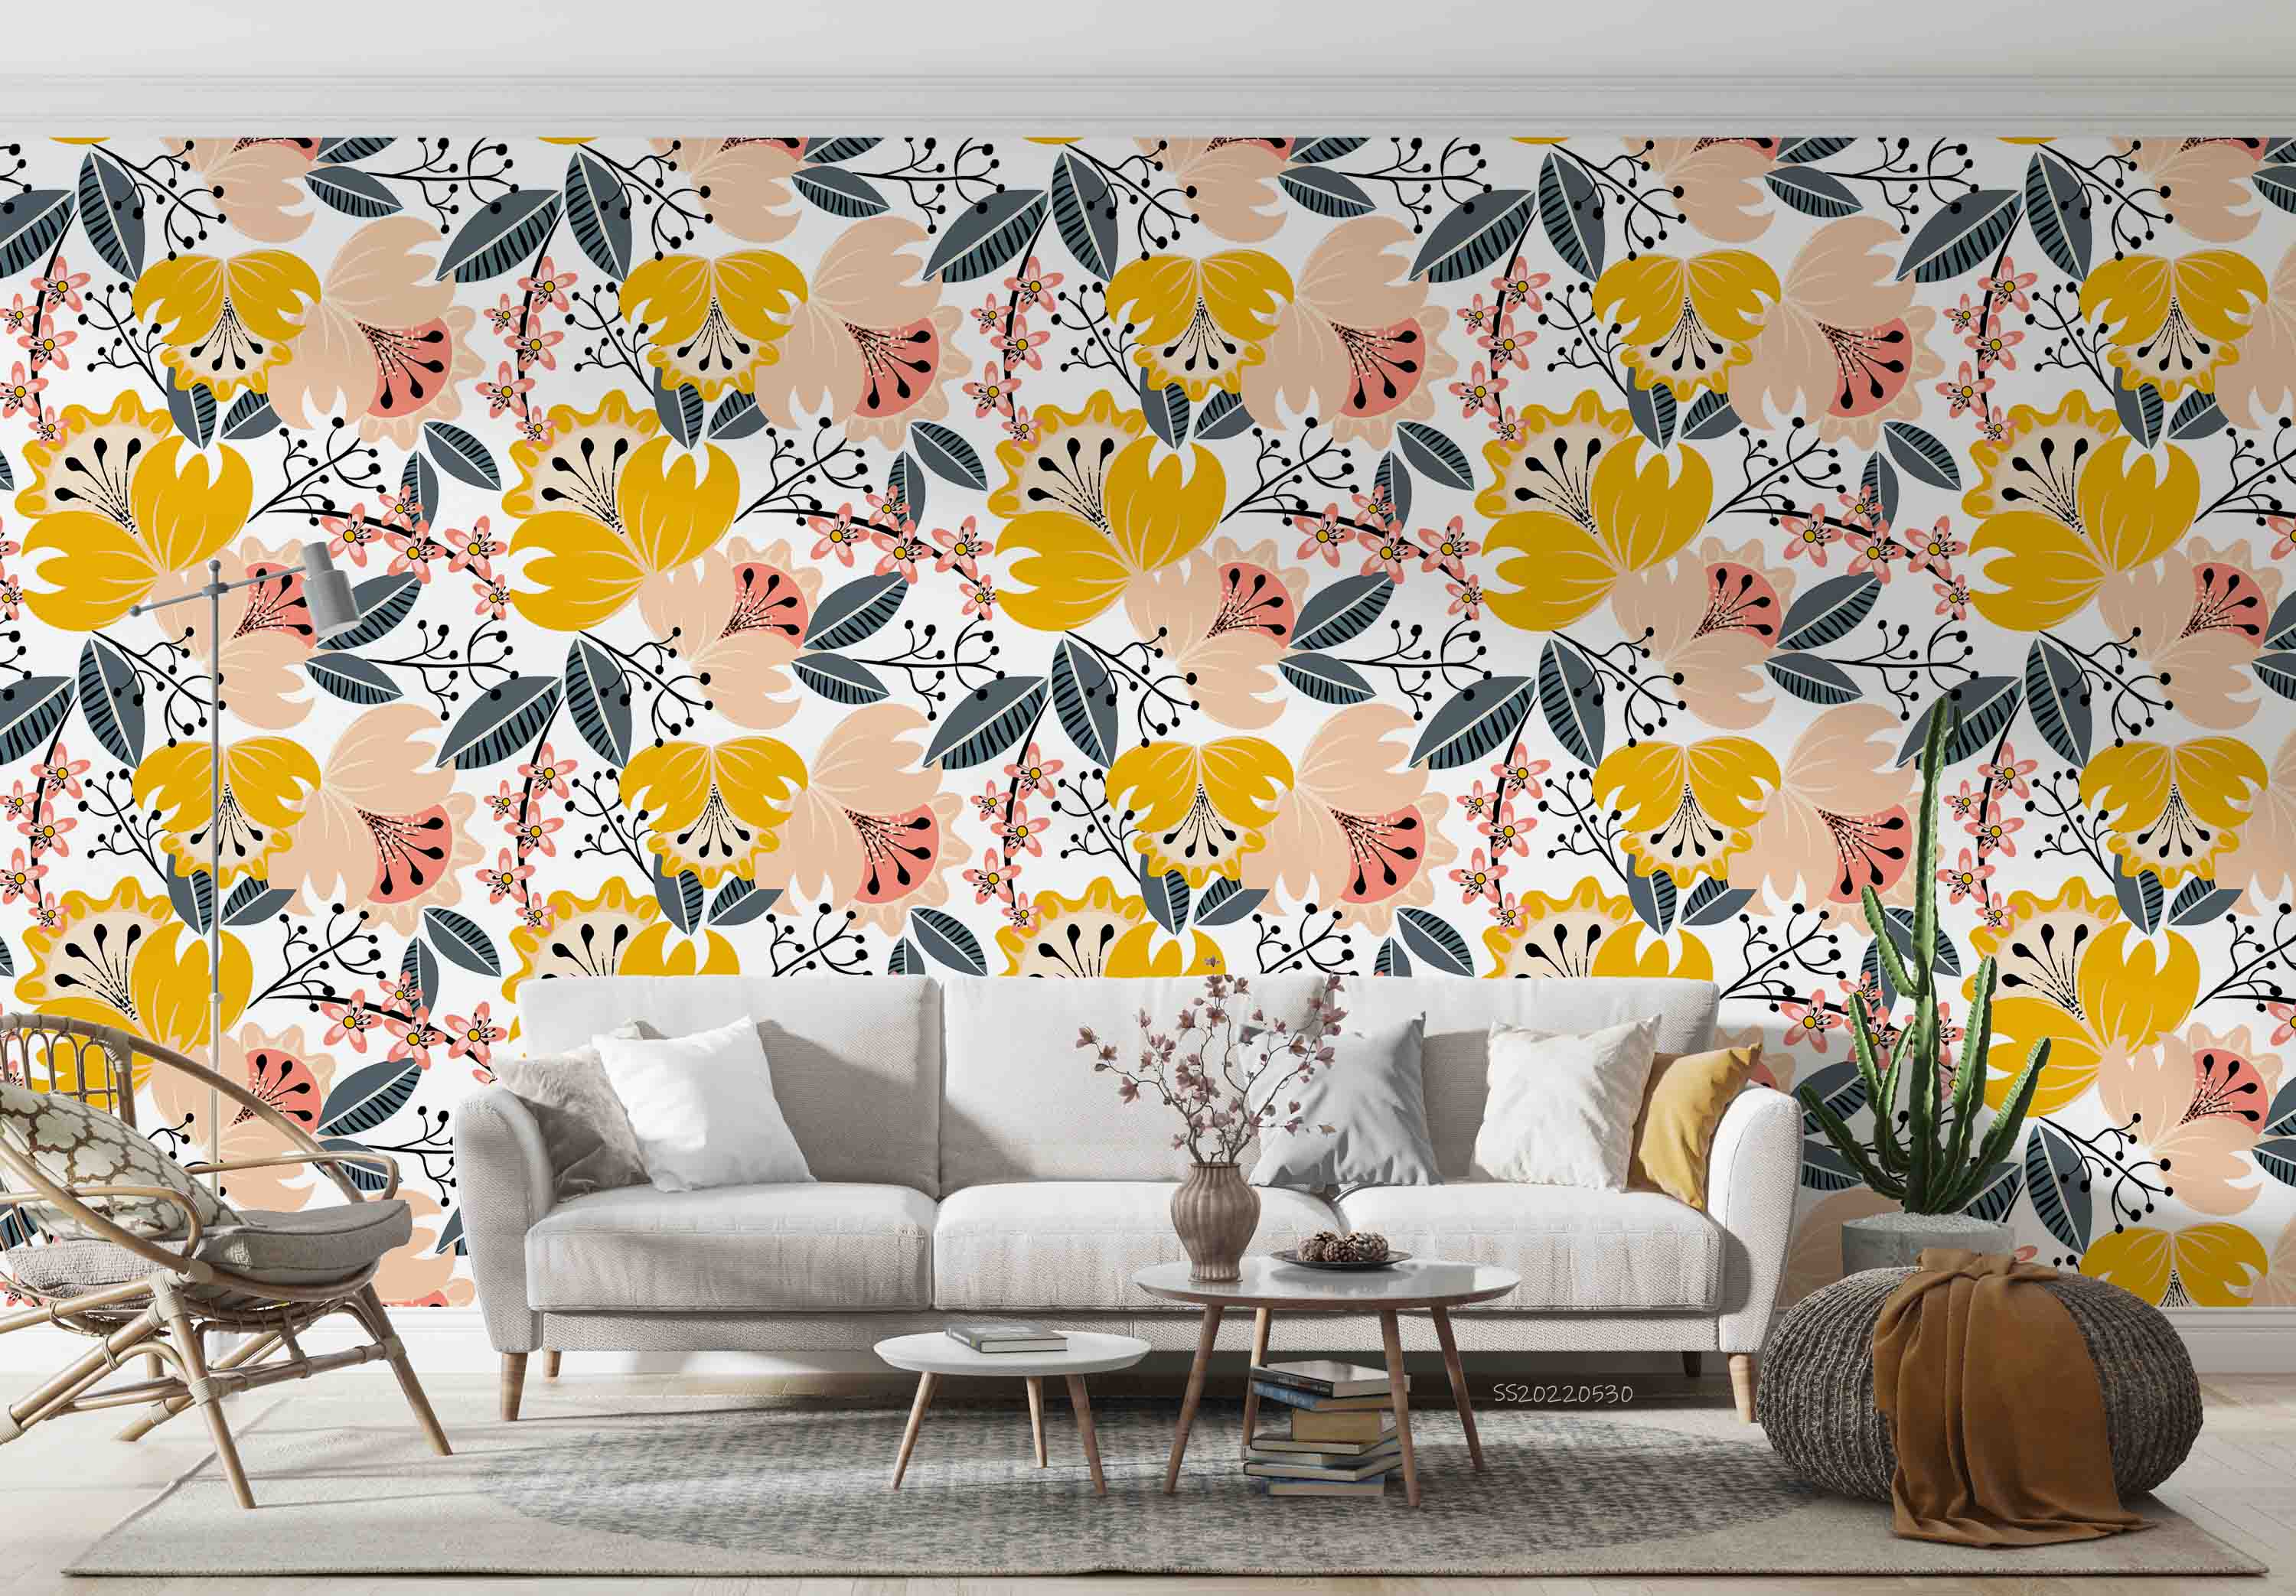 3D Vintage Yellow Floral Leaf White Wall Mural Wallpaper GD 5- Jess Art Decoration